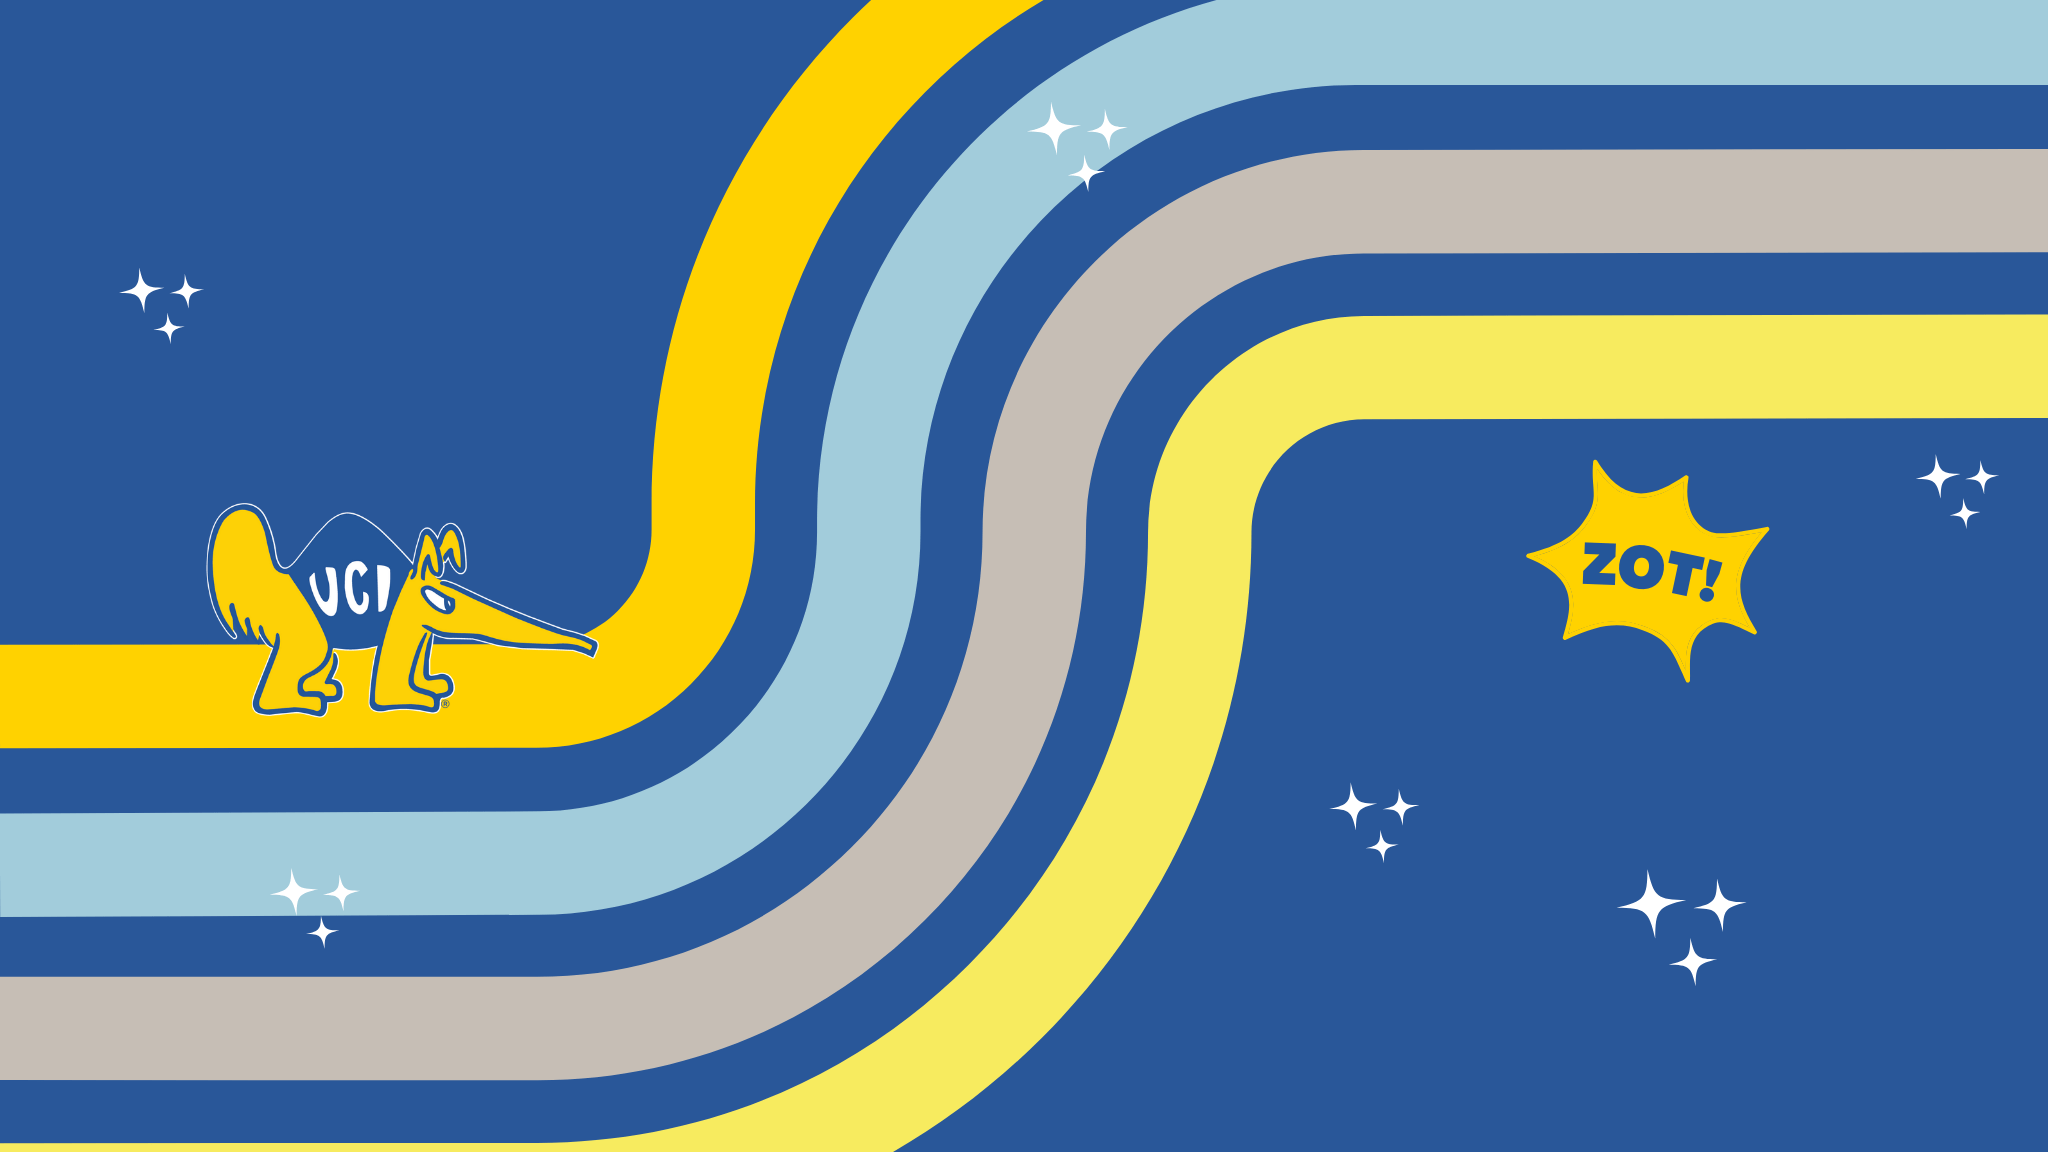 blue background with yellow and light blue waves